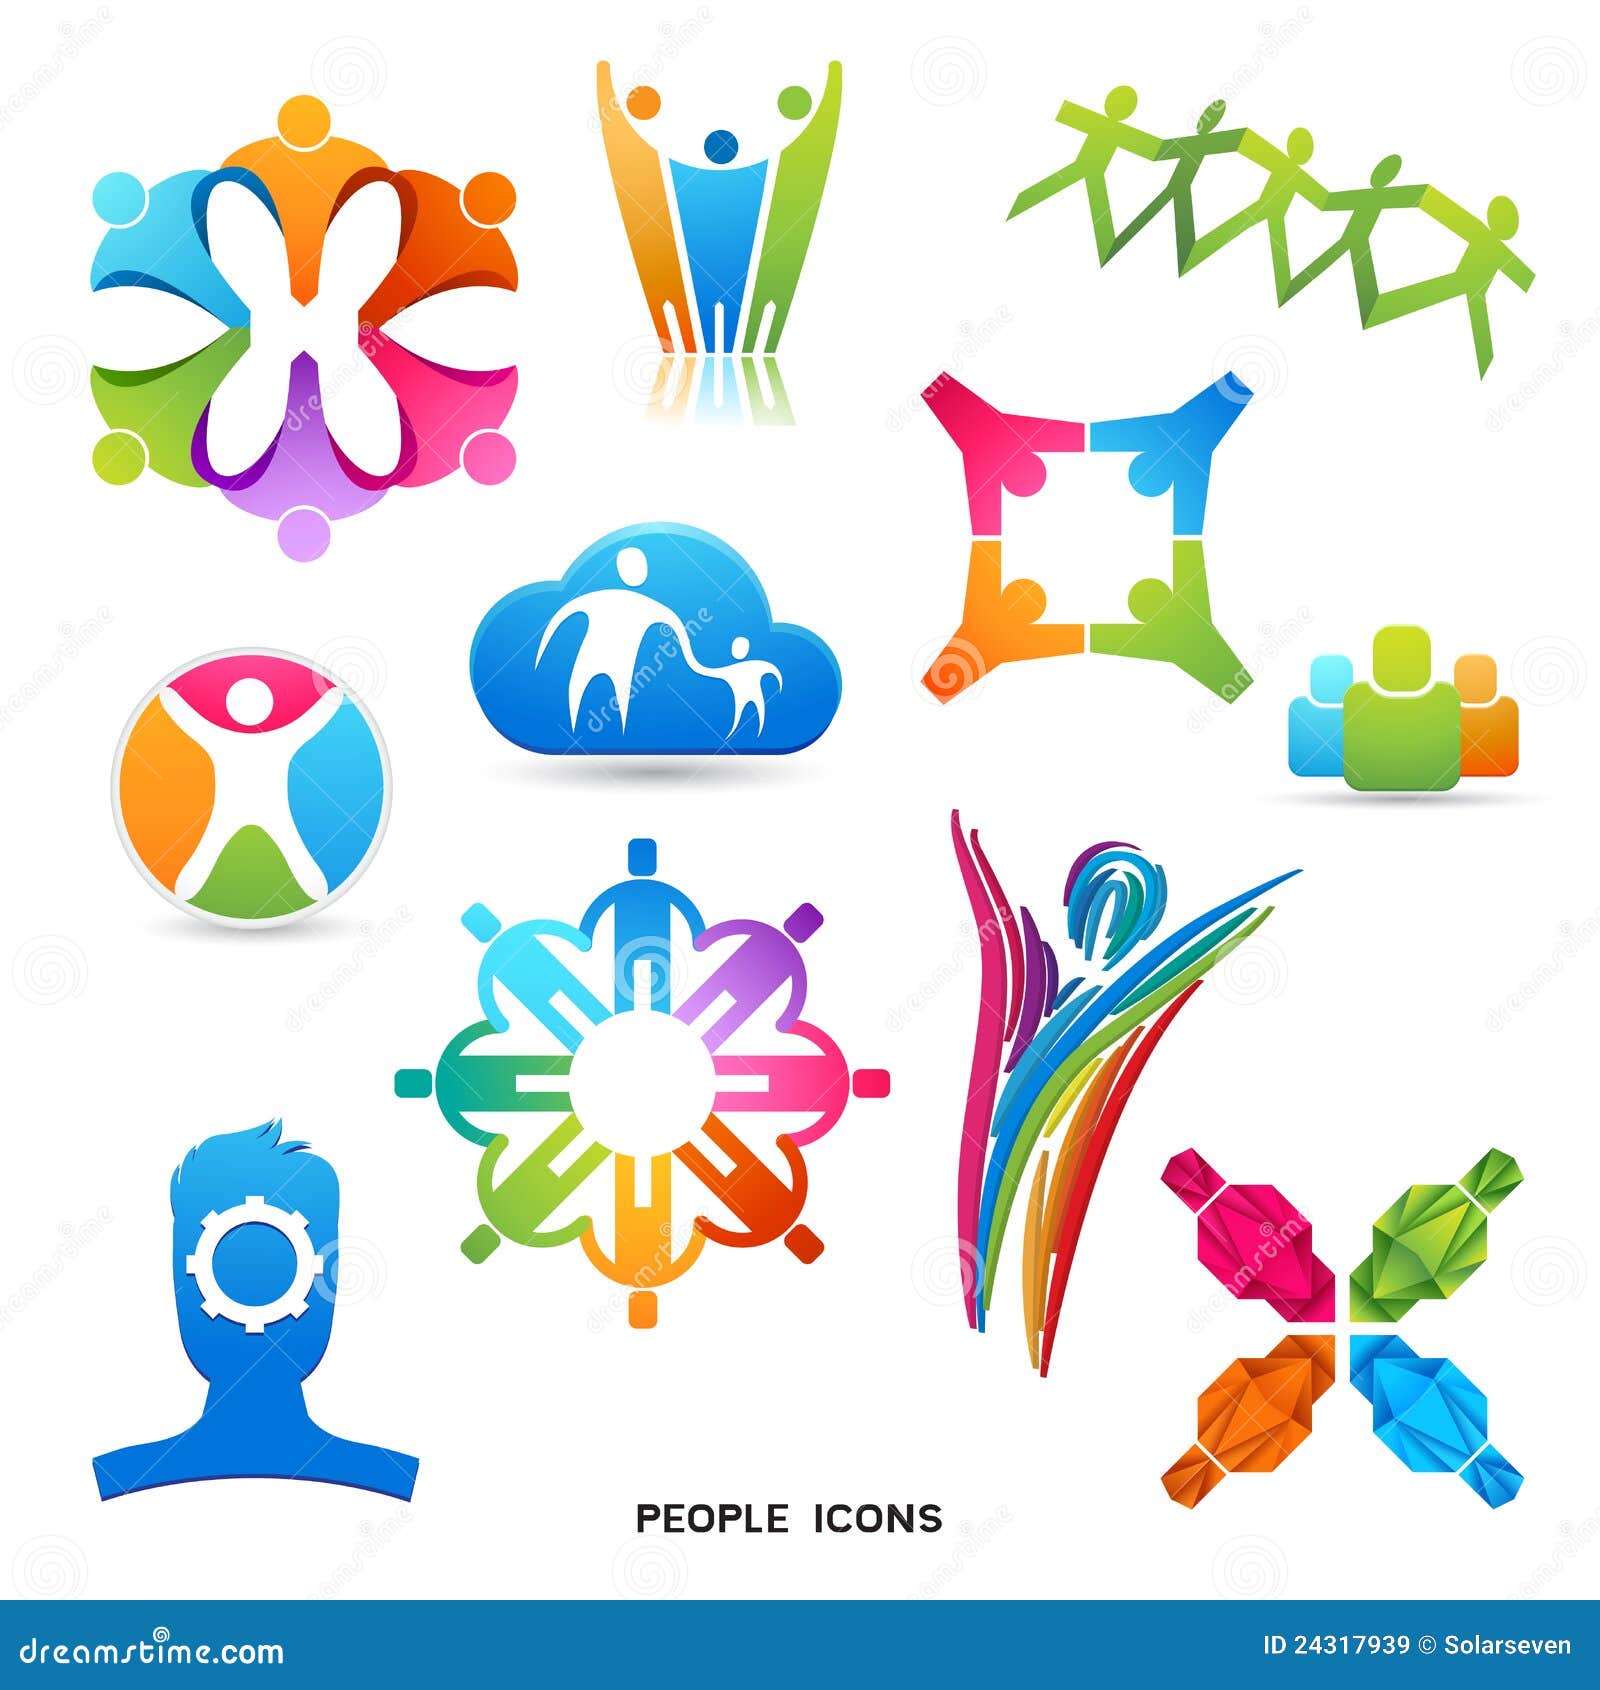 A Collection of People Icons and Symbols, vector designs.